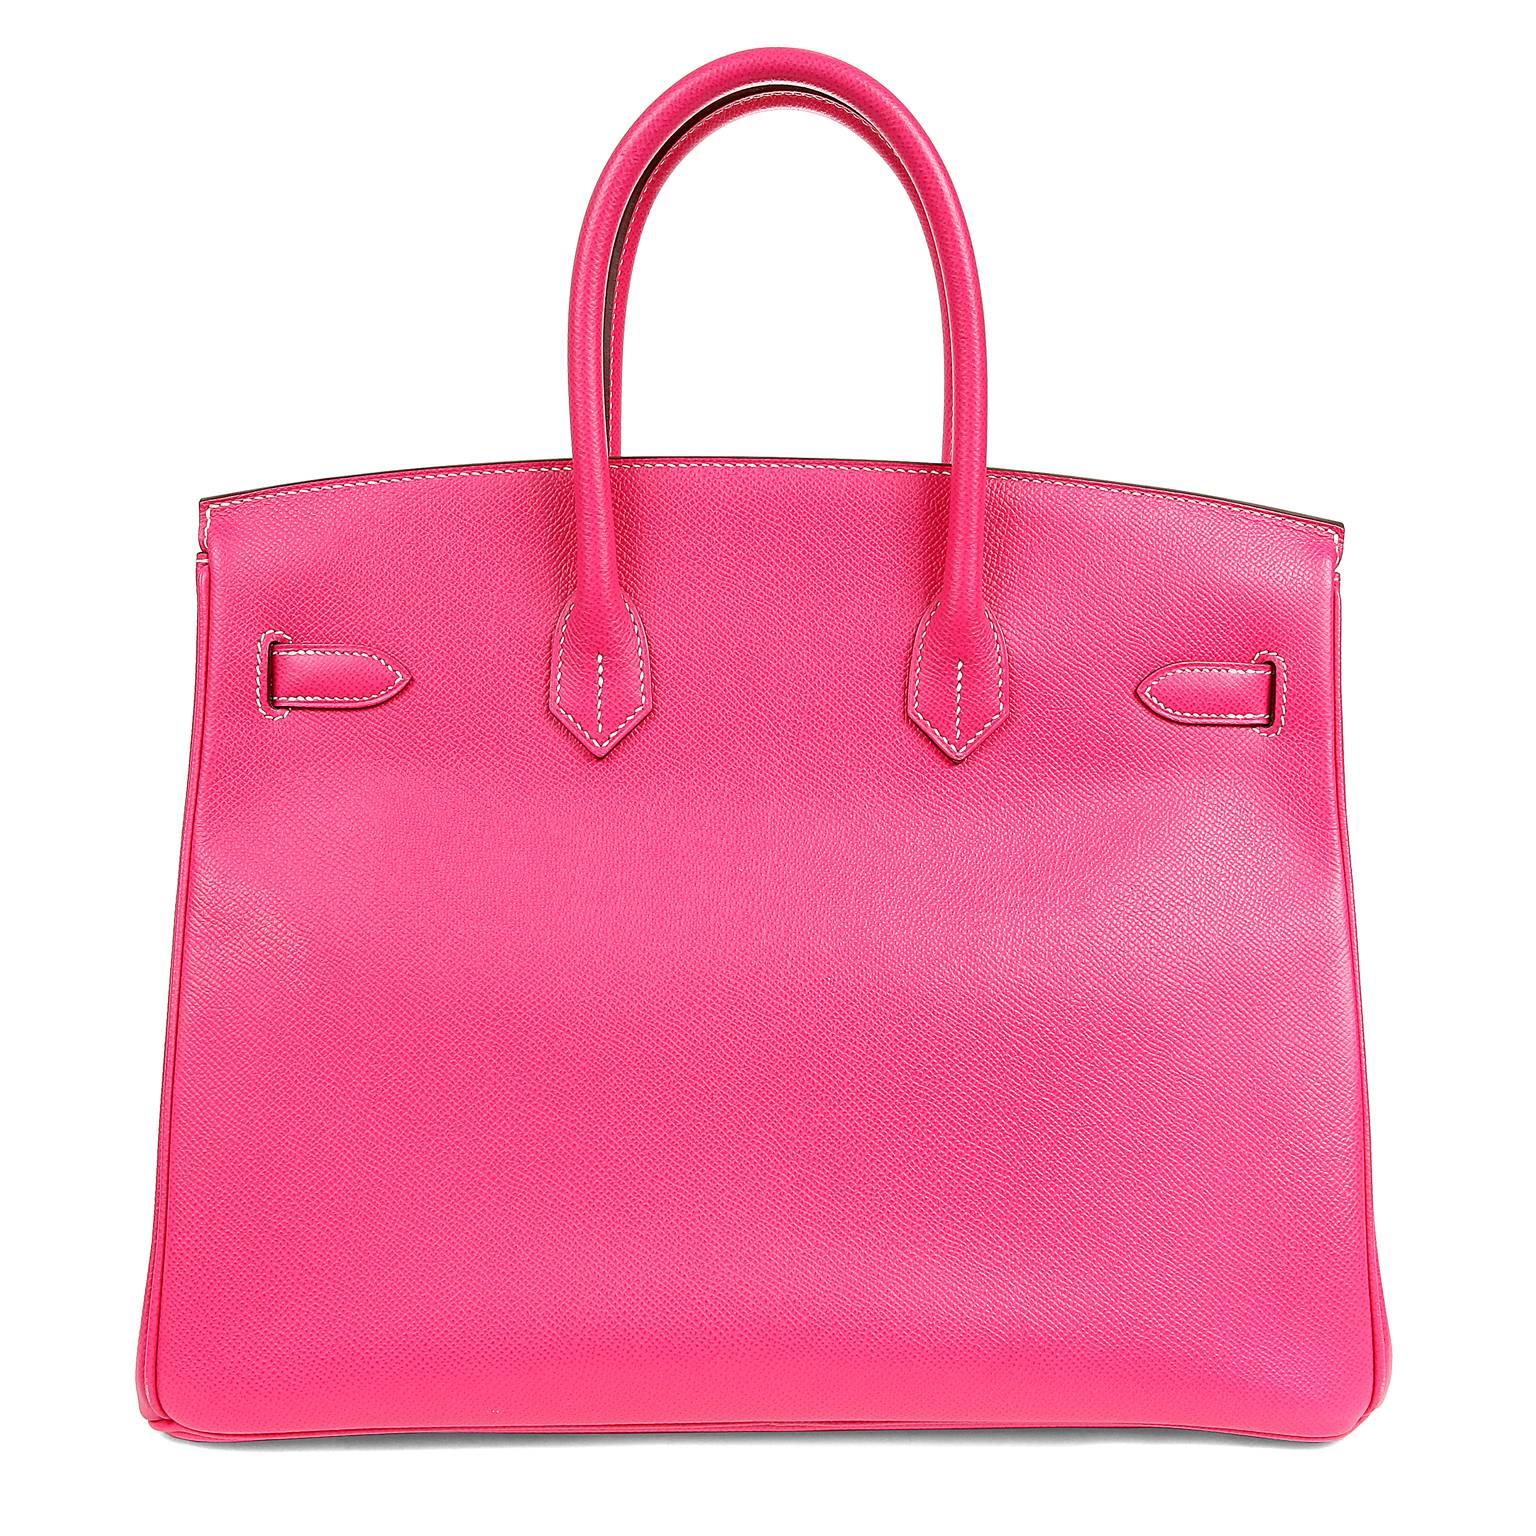 Hermès Rose Tyrien Epsom 35 cm Birkin Bag- Pristine Condition; the protective plastic is still intact on the hardware.   
 The Hermès Birkin is considered the ultimate luxury item.  Hand stitched by skilled craftsmen, wait lists of a year or more